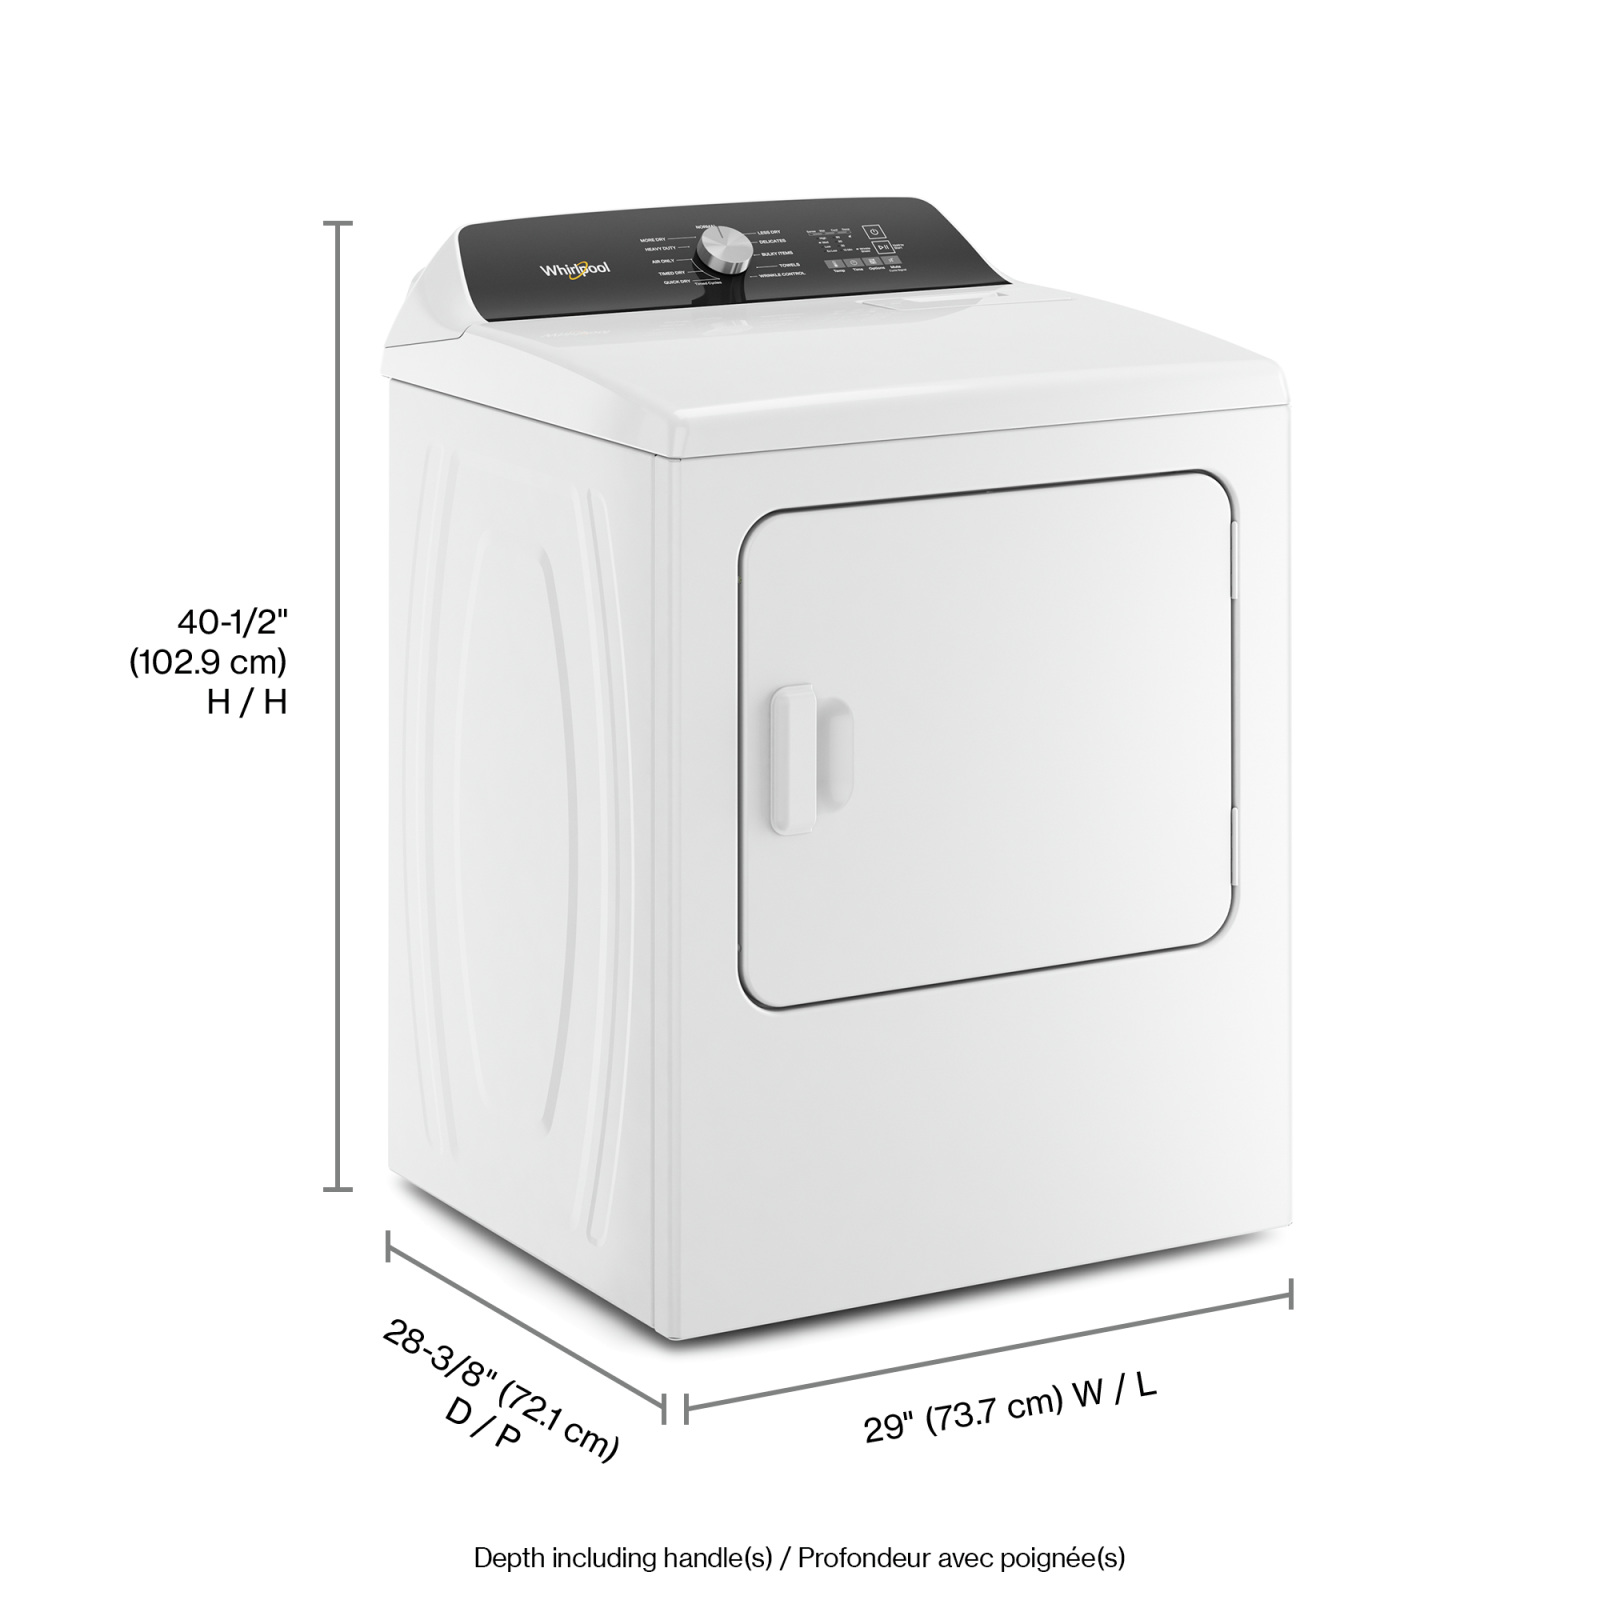 Whirlpool - 7 cu. Ft  Electric Dryer in White - YWED5010LW